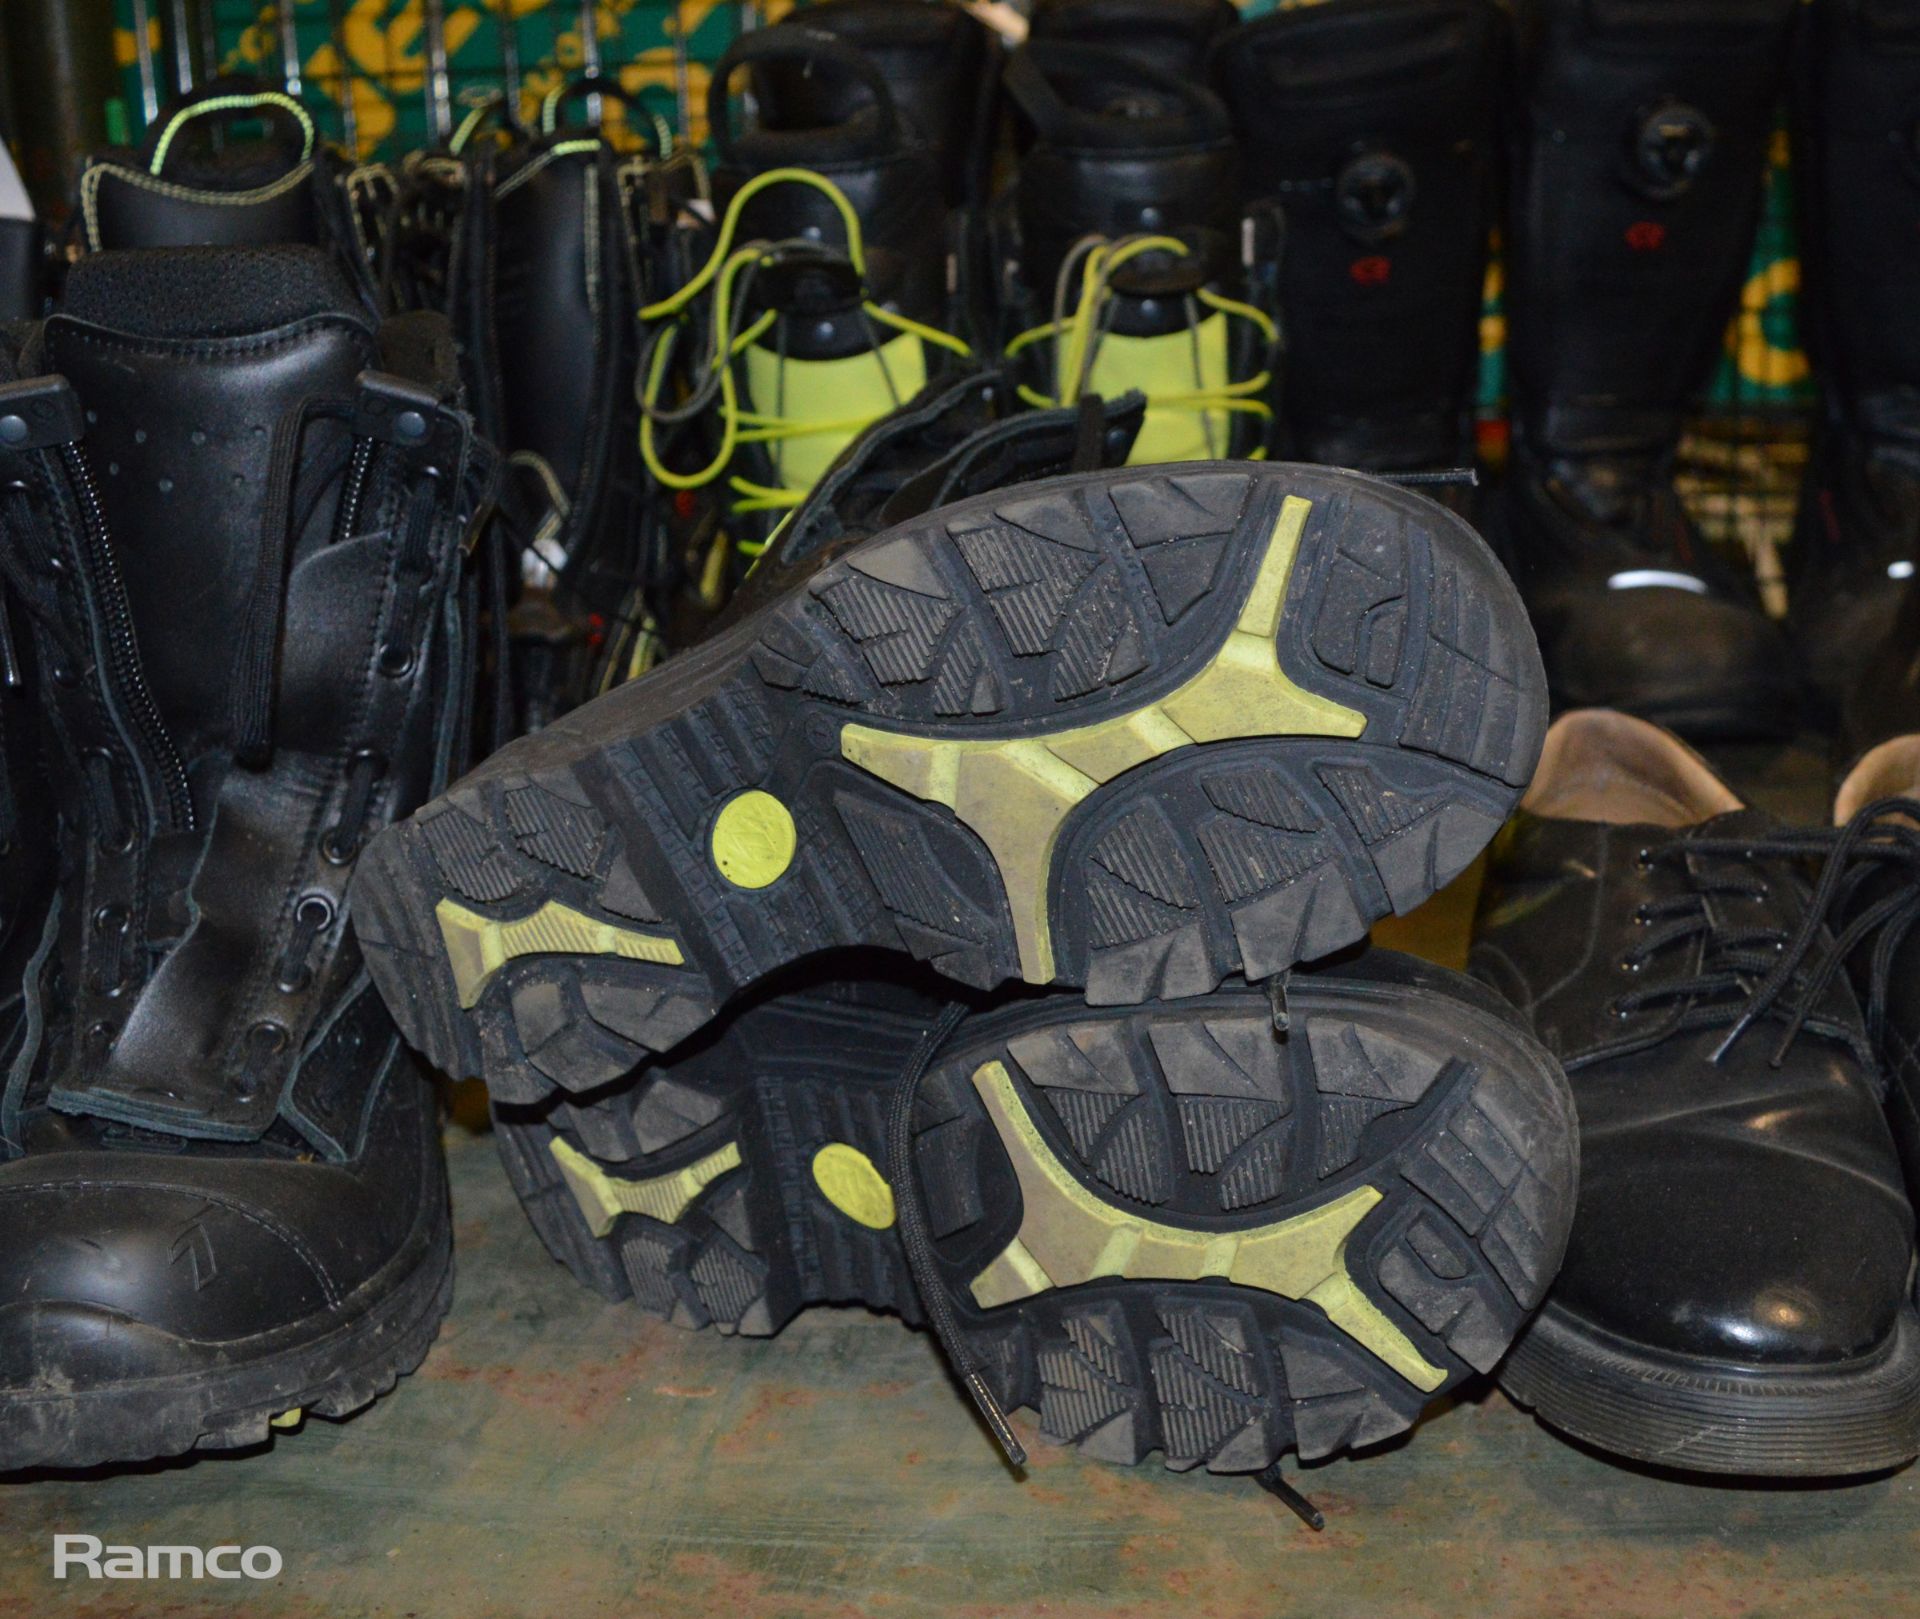 11 pairs of Protective boots - various styles / makes / sizes, Black shoes - various sizes, Wellies - Image 3 of 4